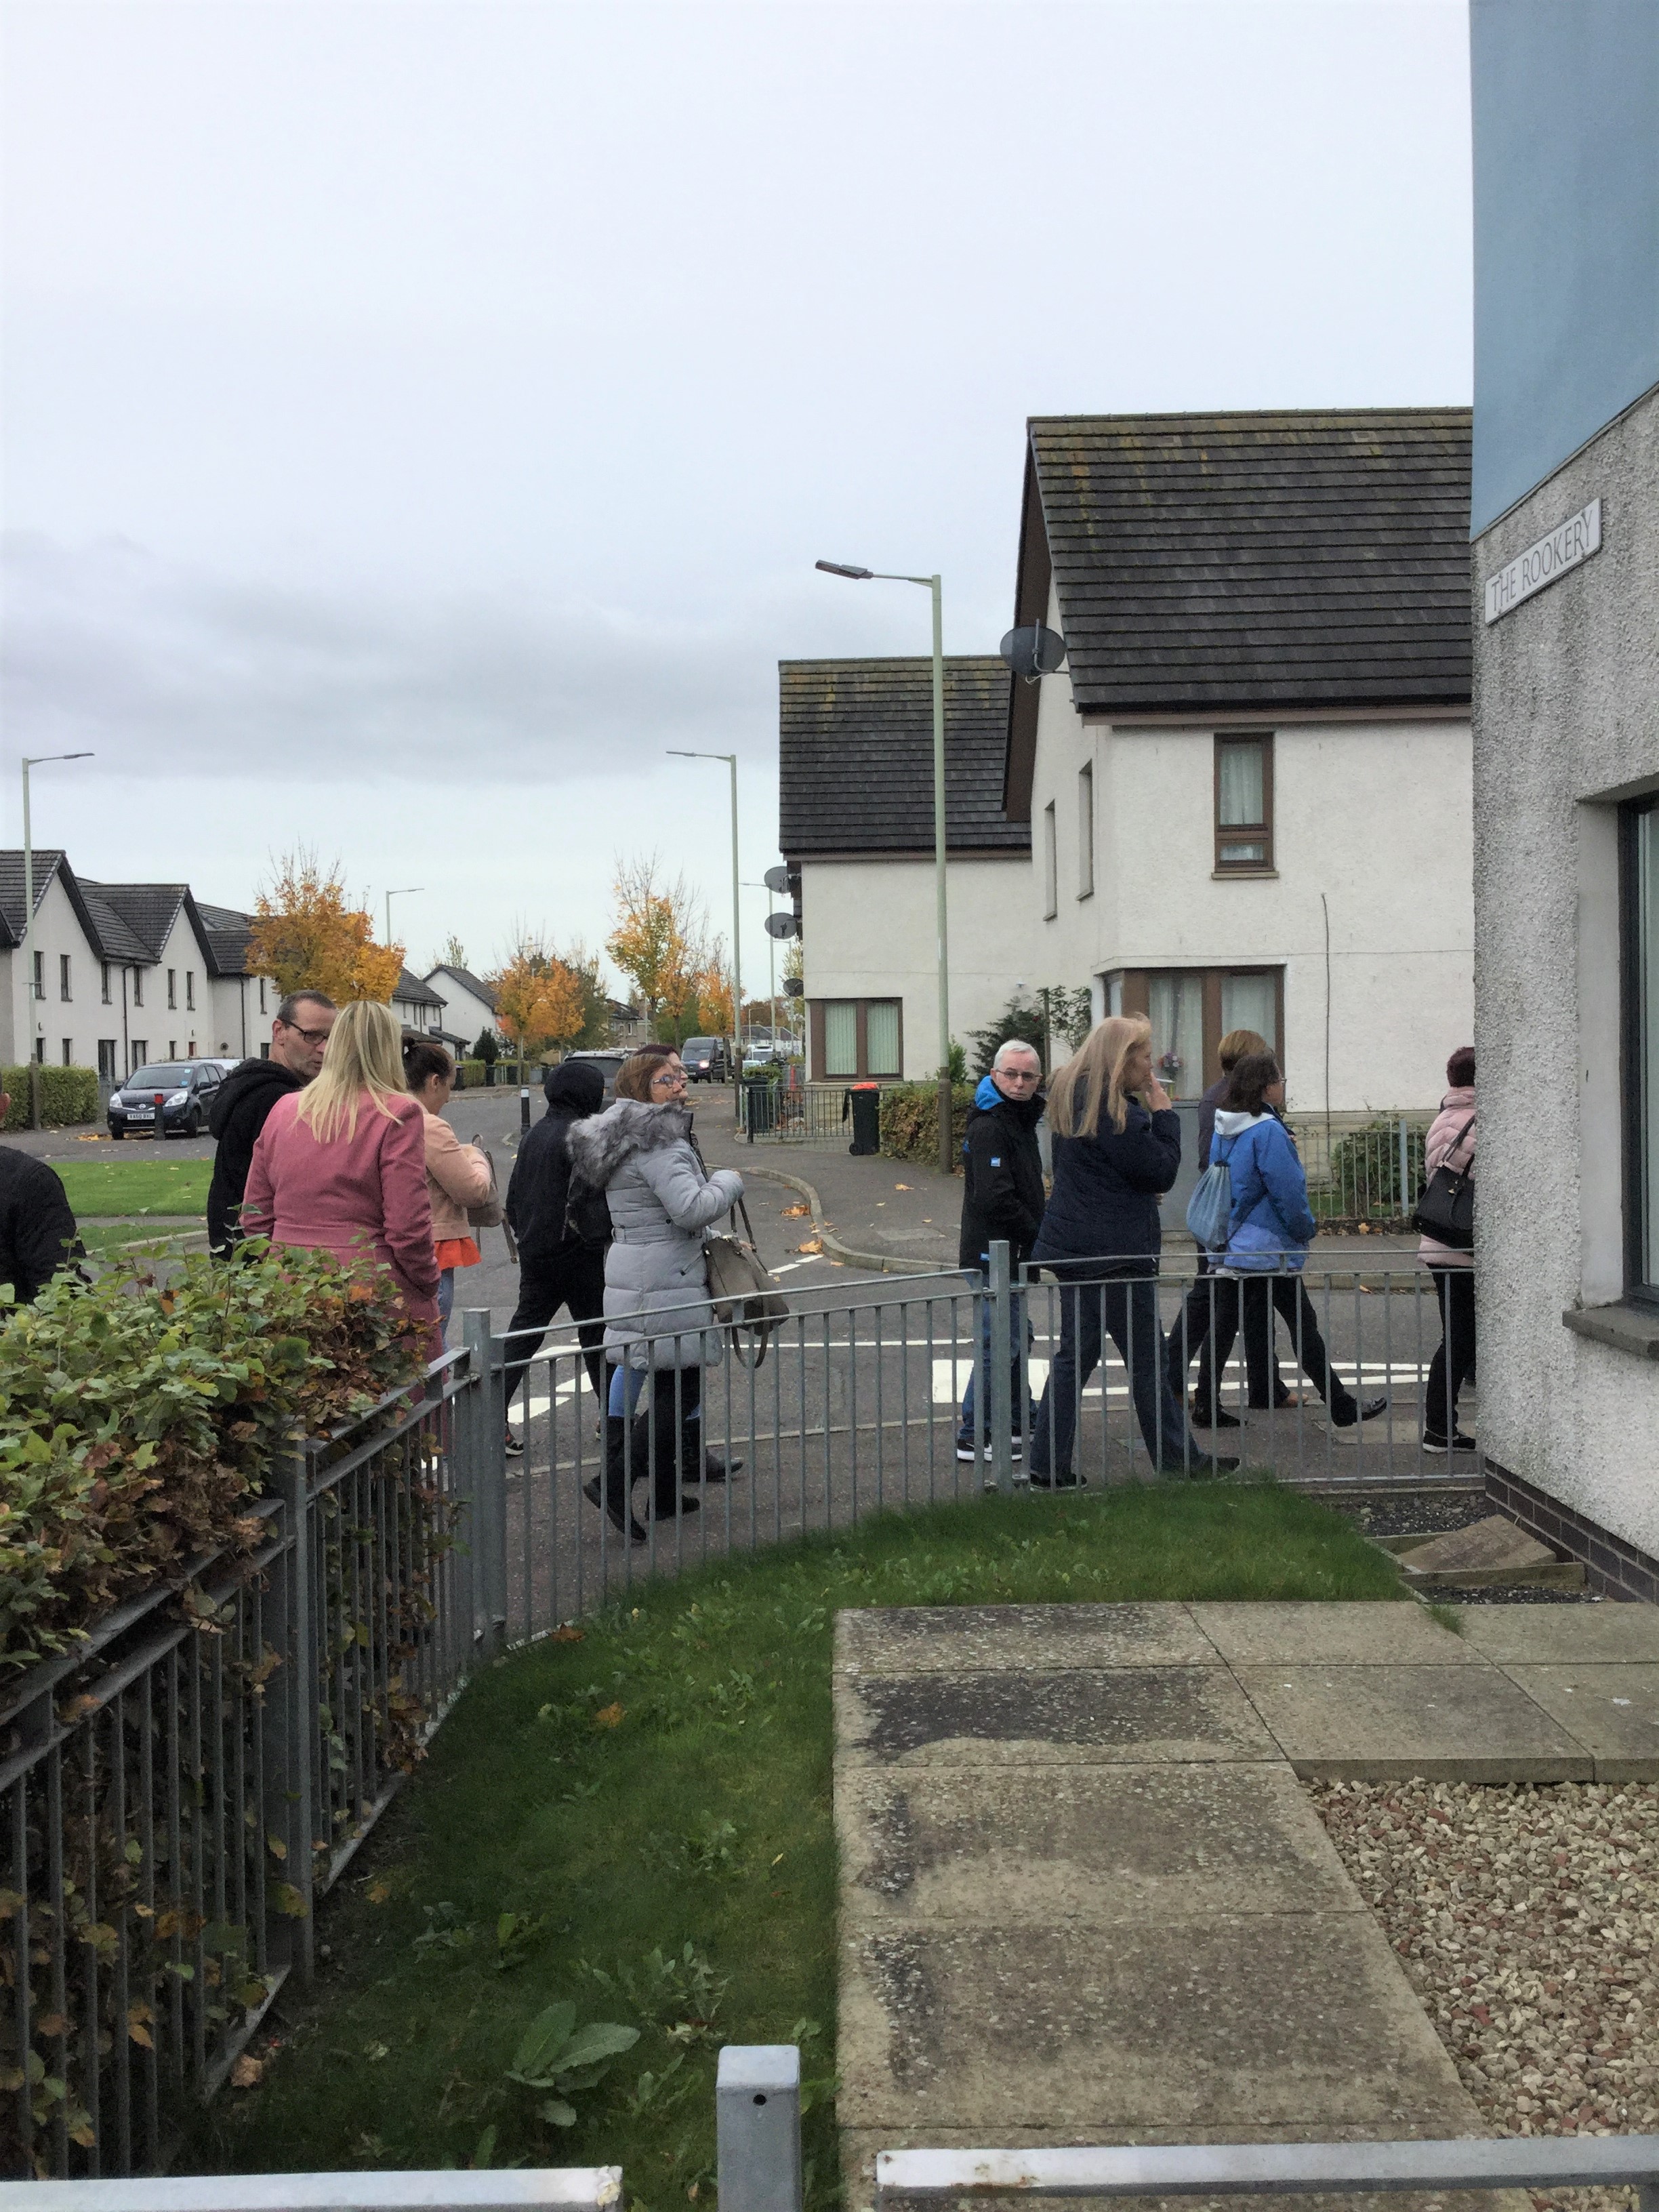 Bellsmyre residents view Caledonia’s approach to developing communities